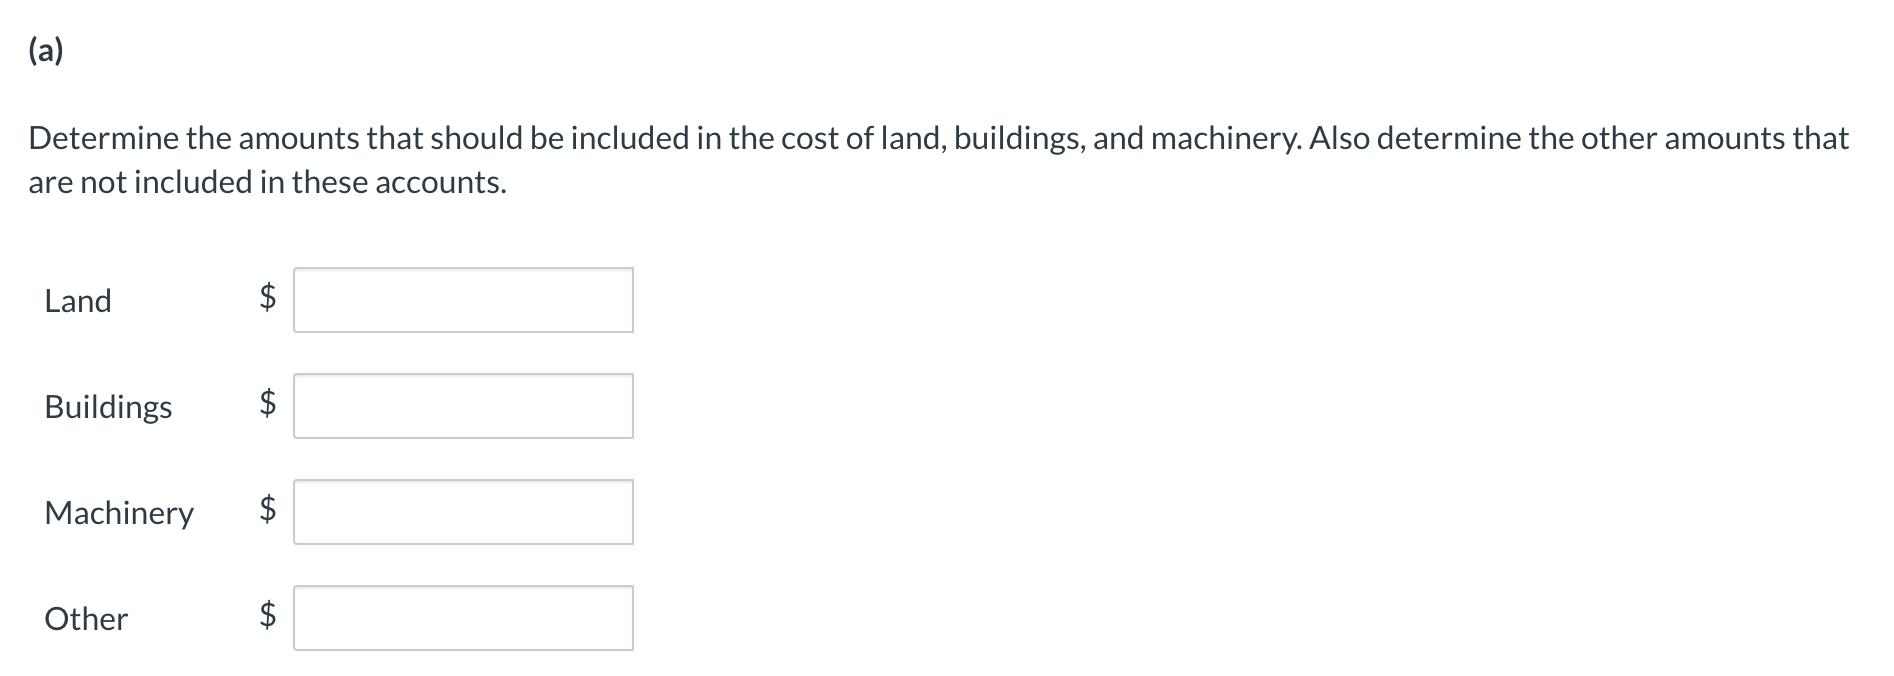 (a) Determine the amounts that should be included in the cost of land, buildings, and machinery. Also